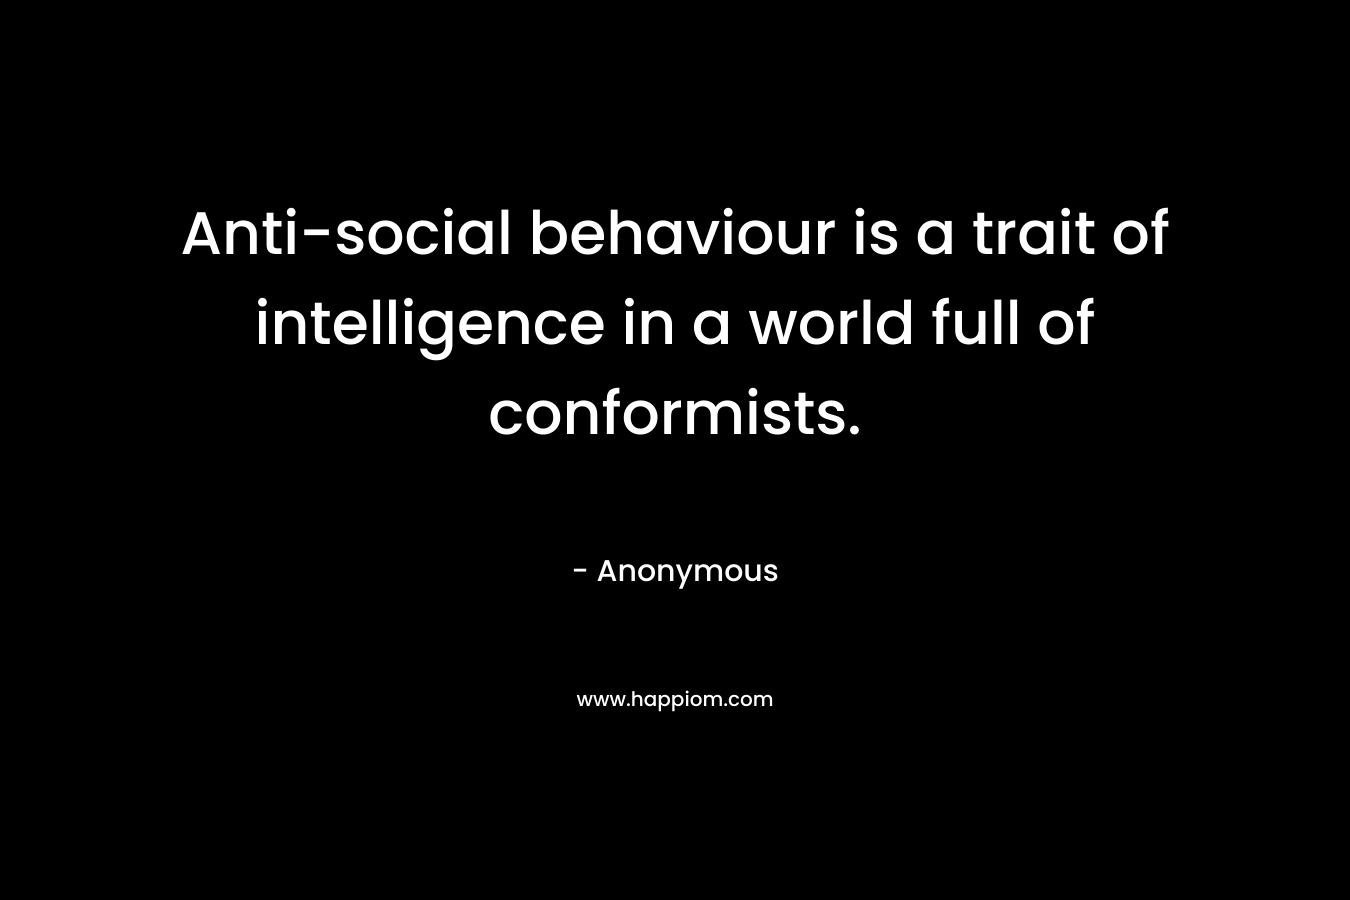 Anti-social behaviour is a trait of intelligence in a world full of conformists.